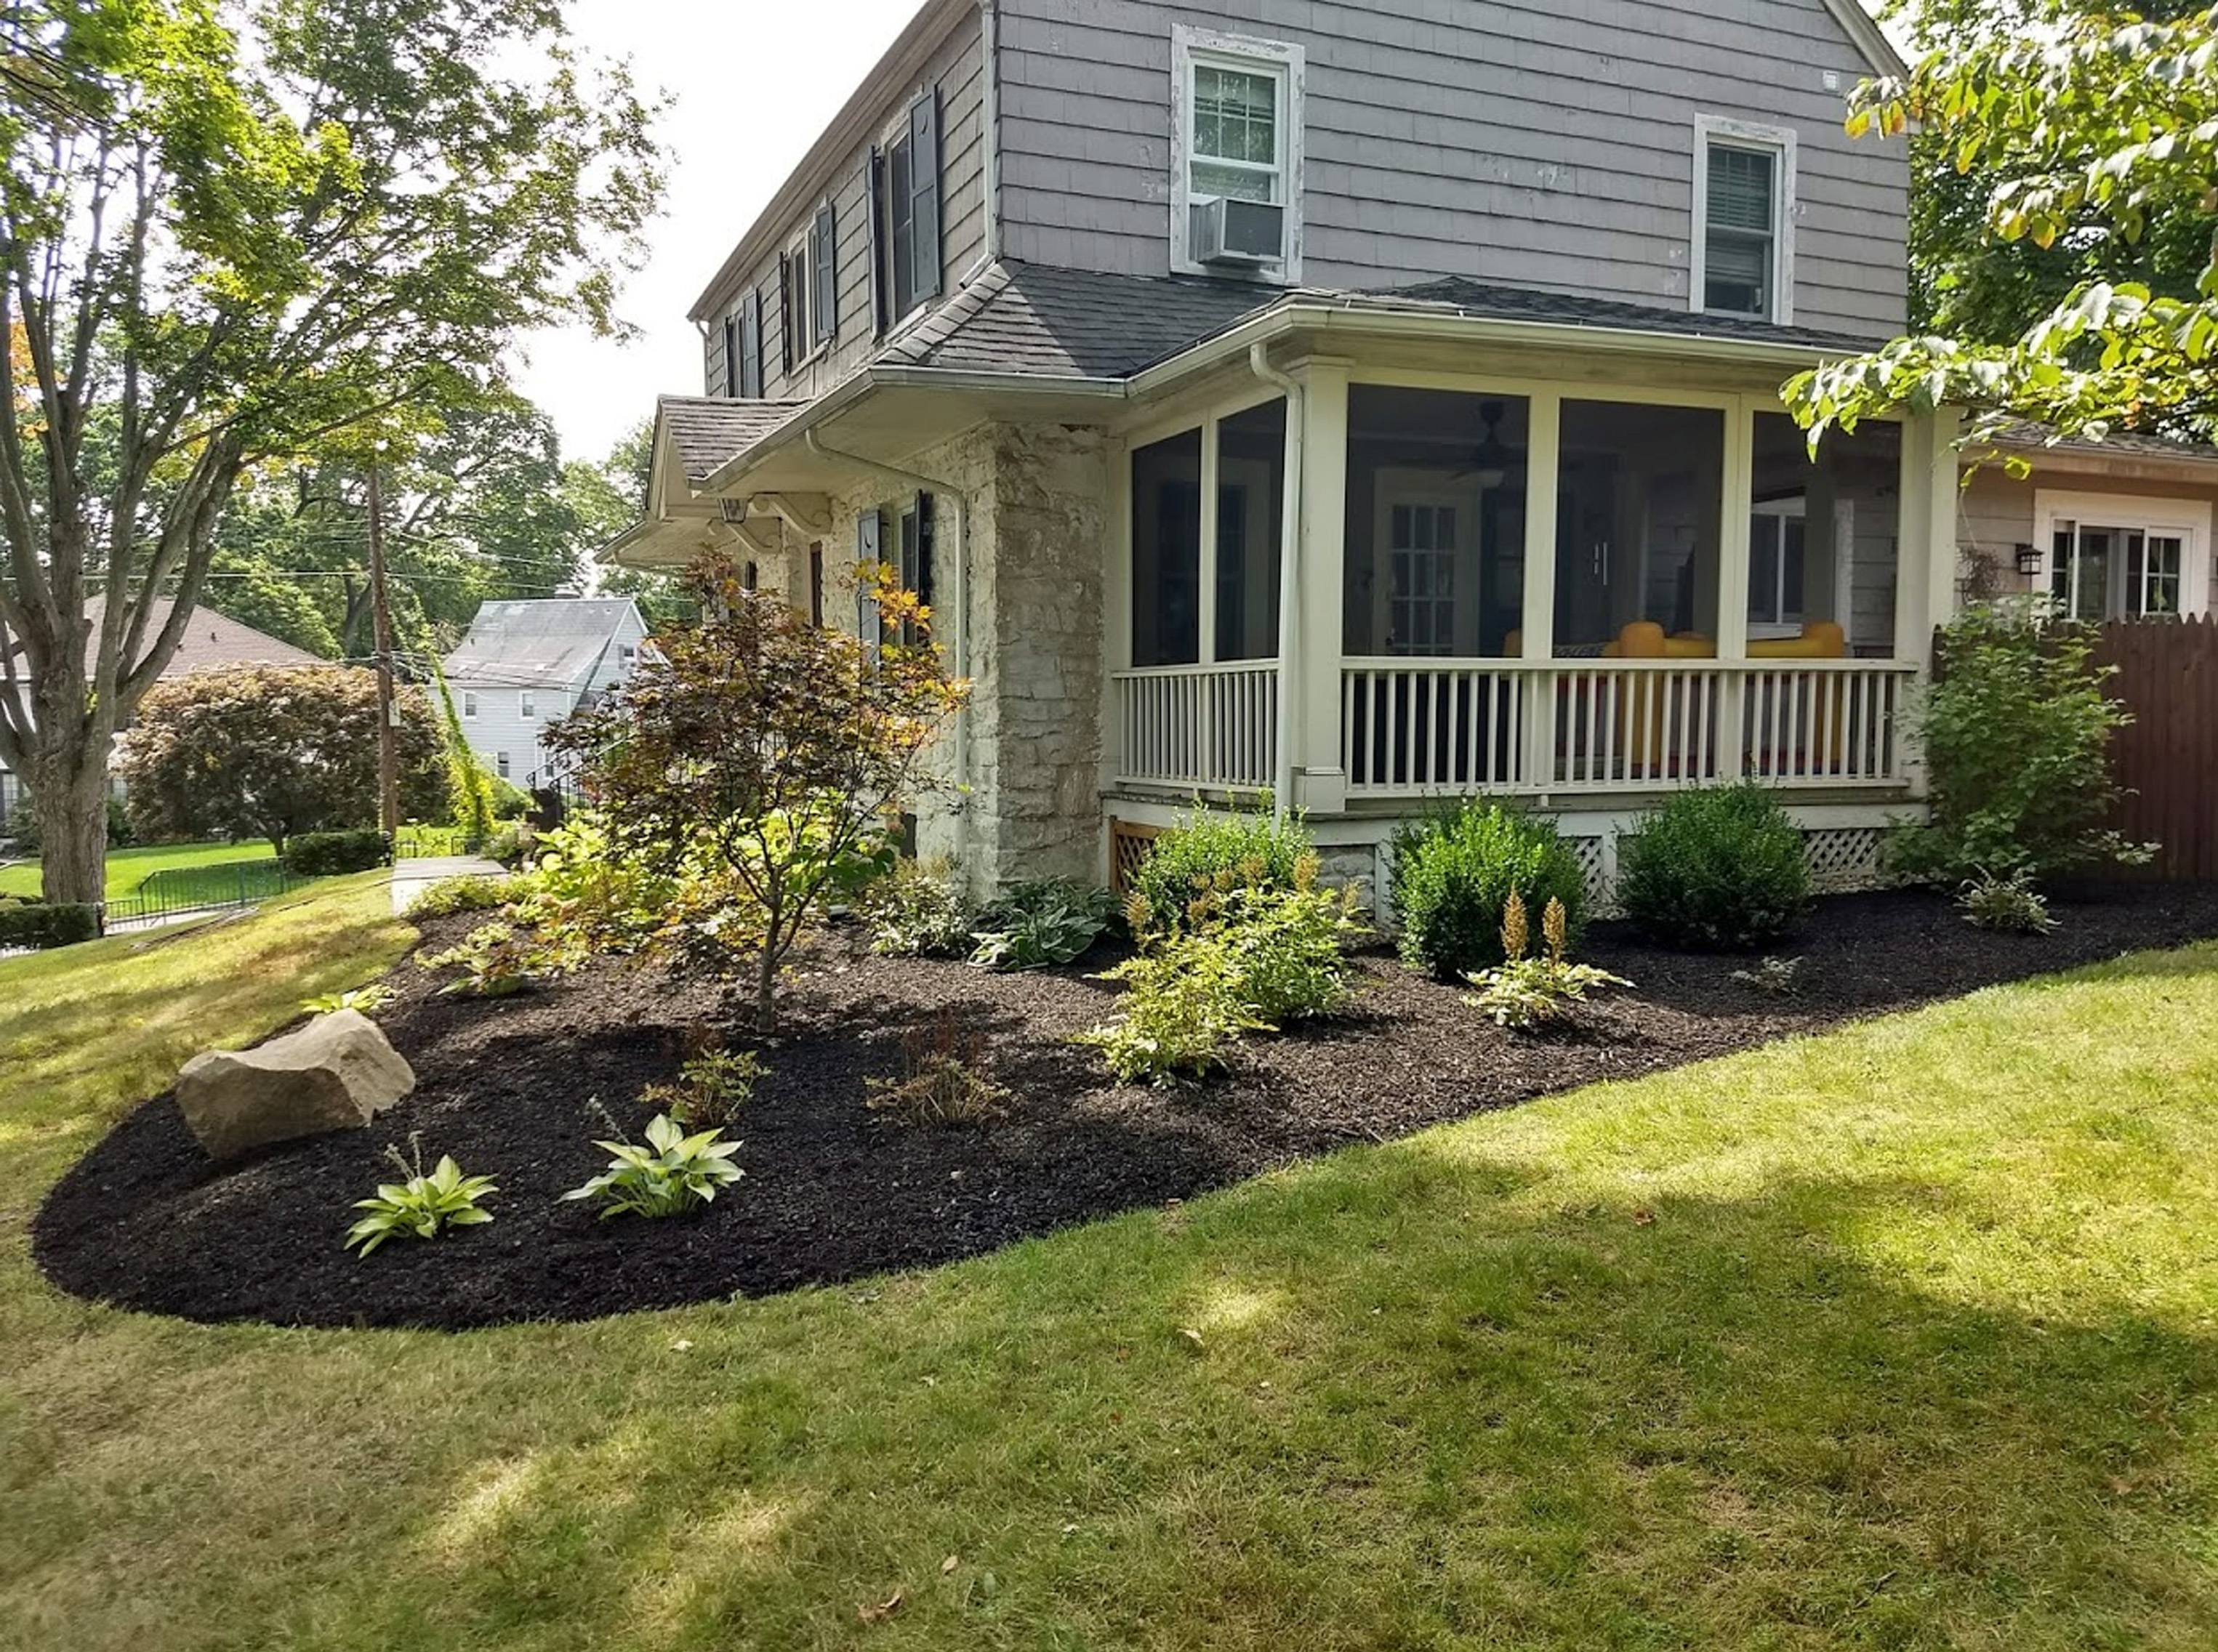 Thumbnail of completed plant bed, on the corner, with mulch and edging